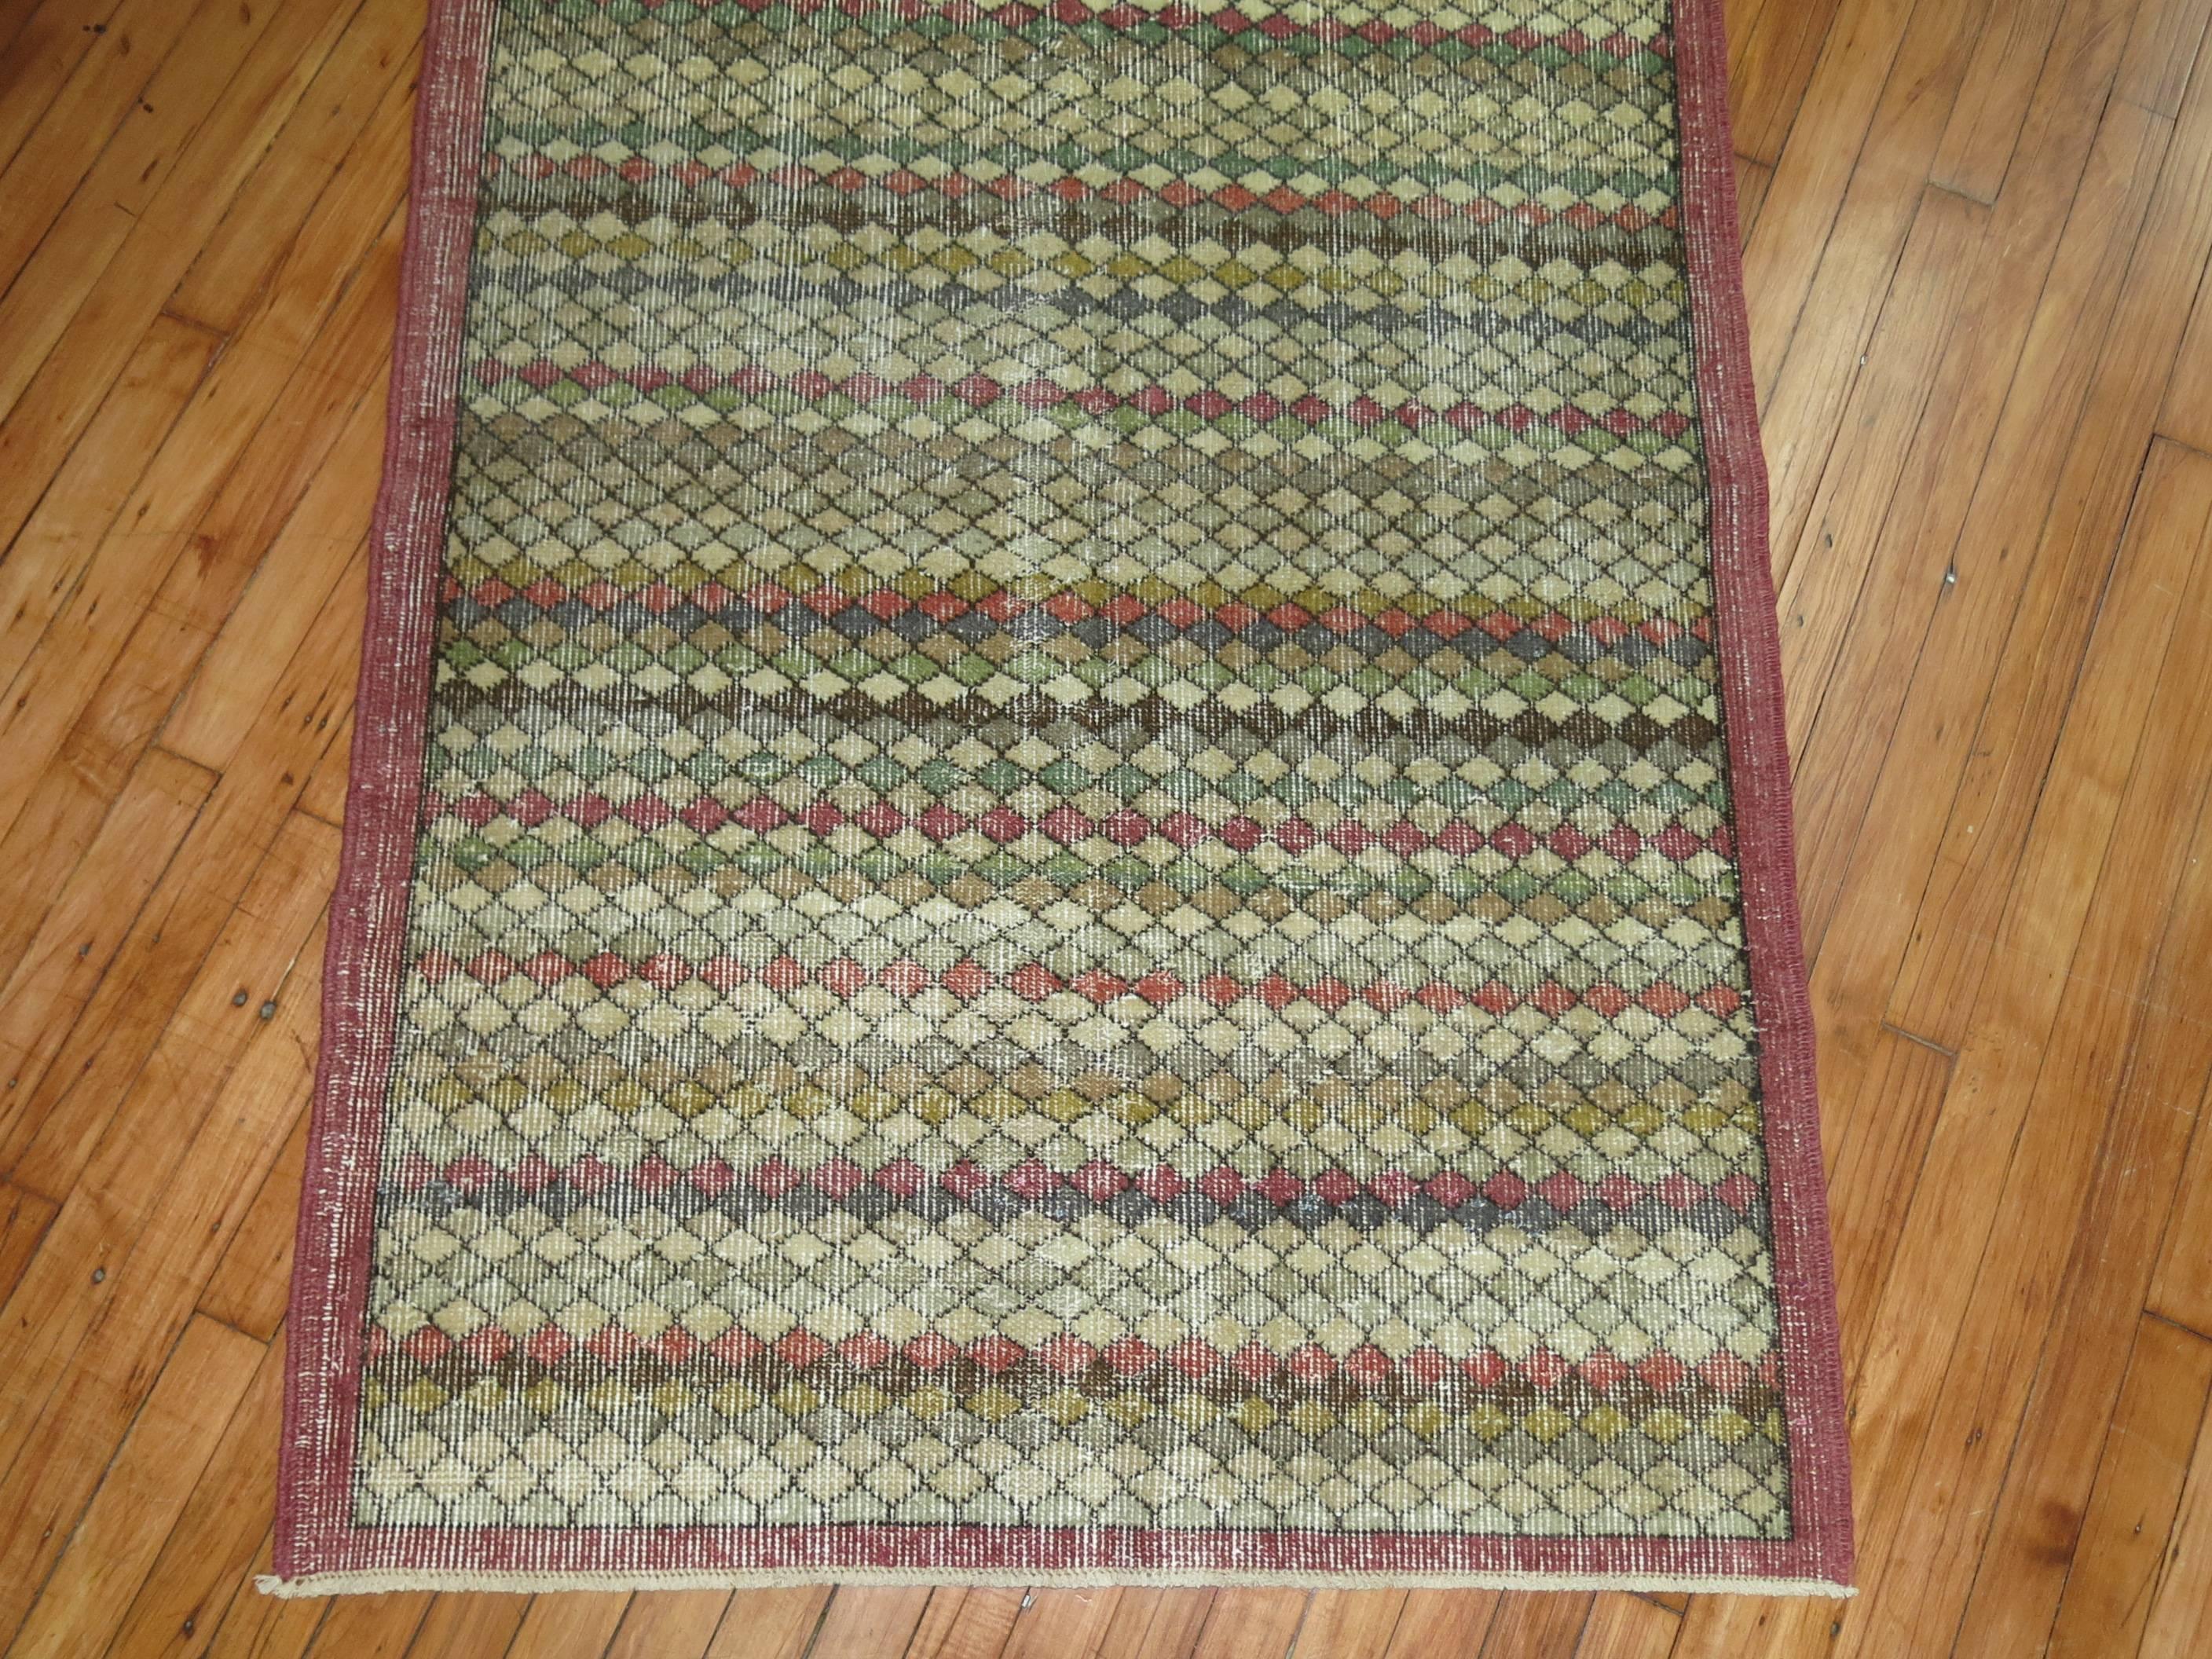 a fun small runner size mid 20th century Turkish Deco rug with a repetitive diamond motif throughout

3'6'' x 7'1''